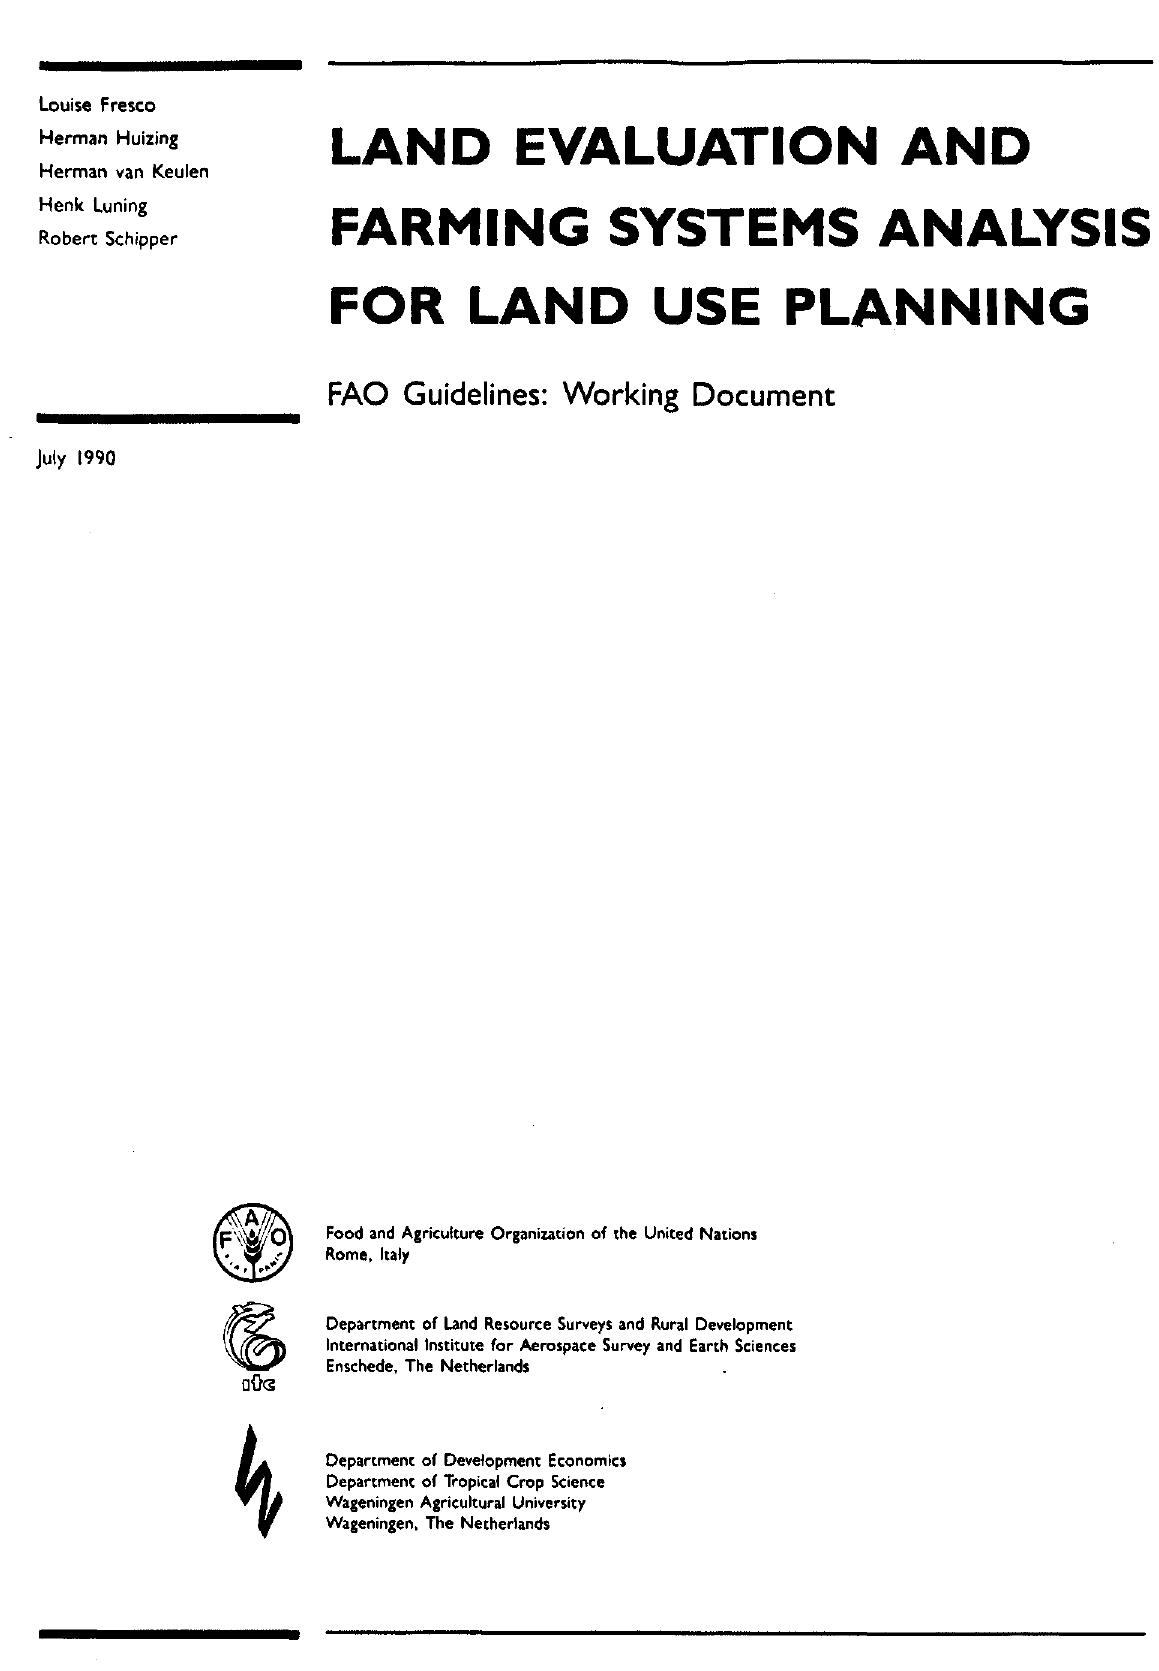 land evaluation and farming systems analysis for land use planning. 1990